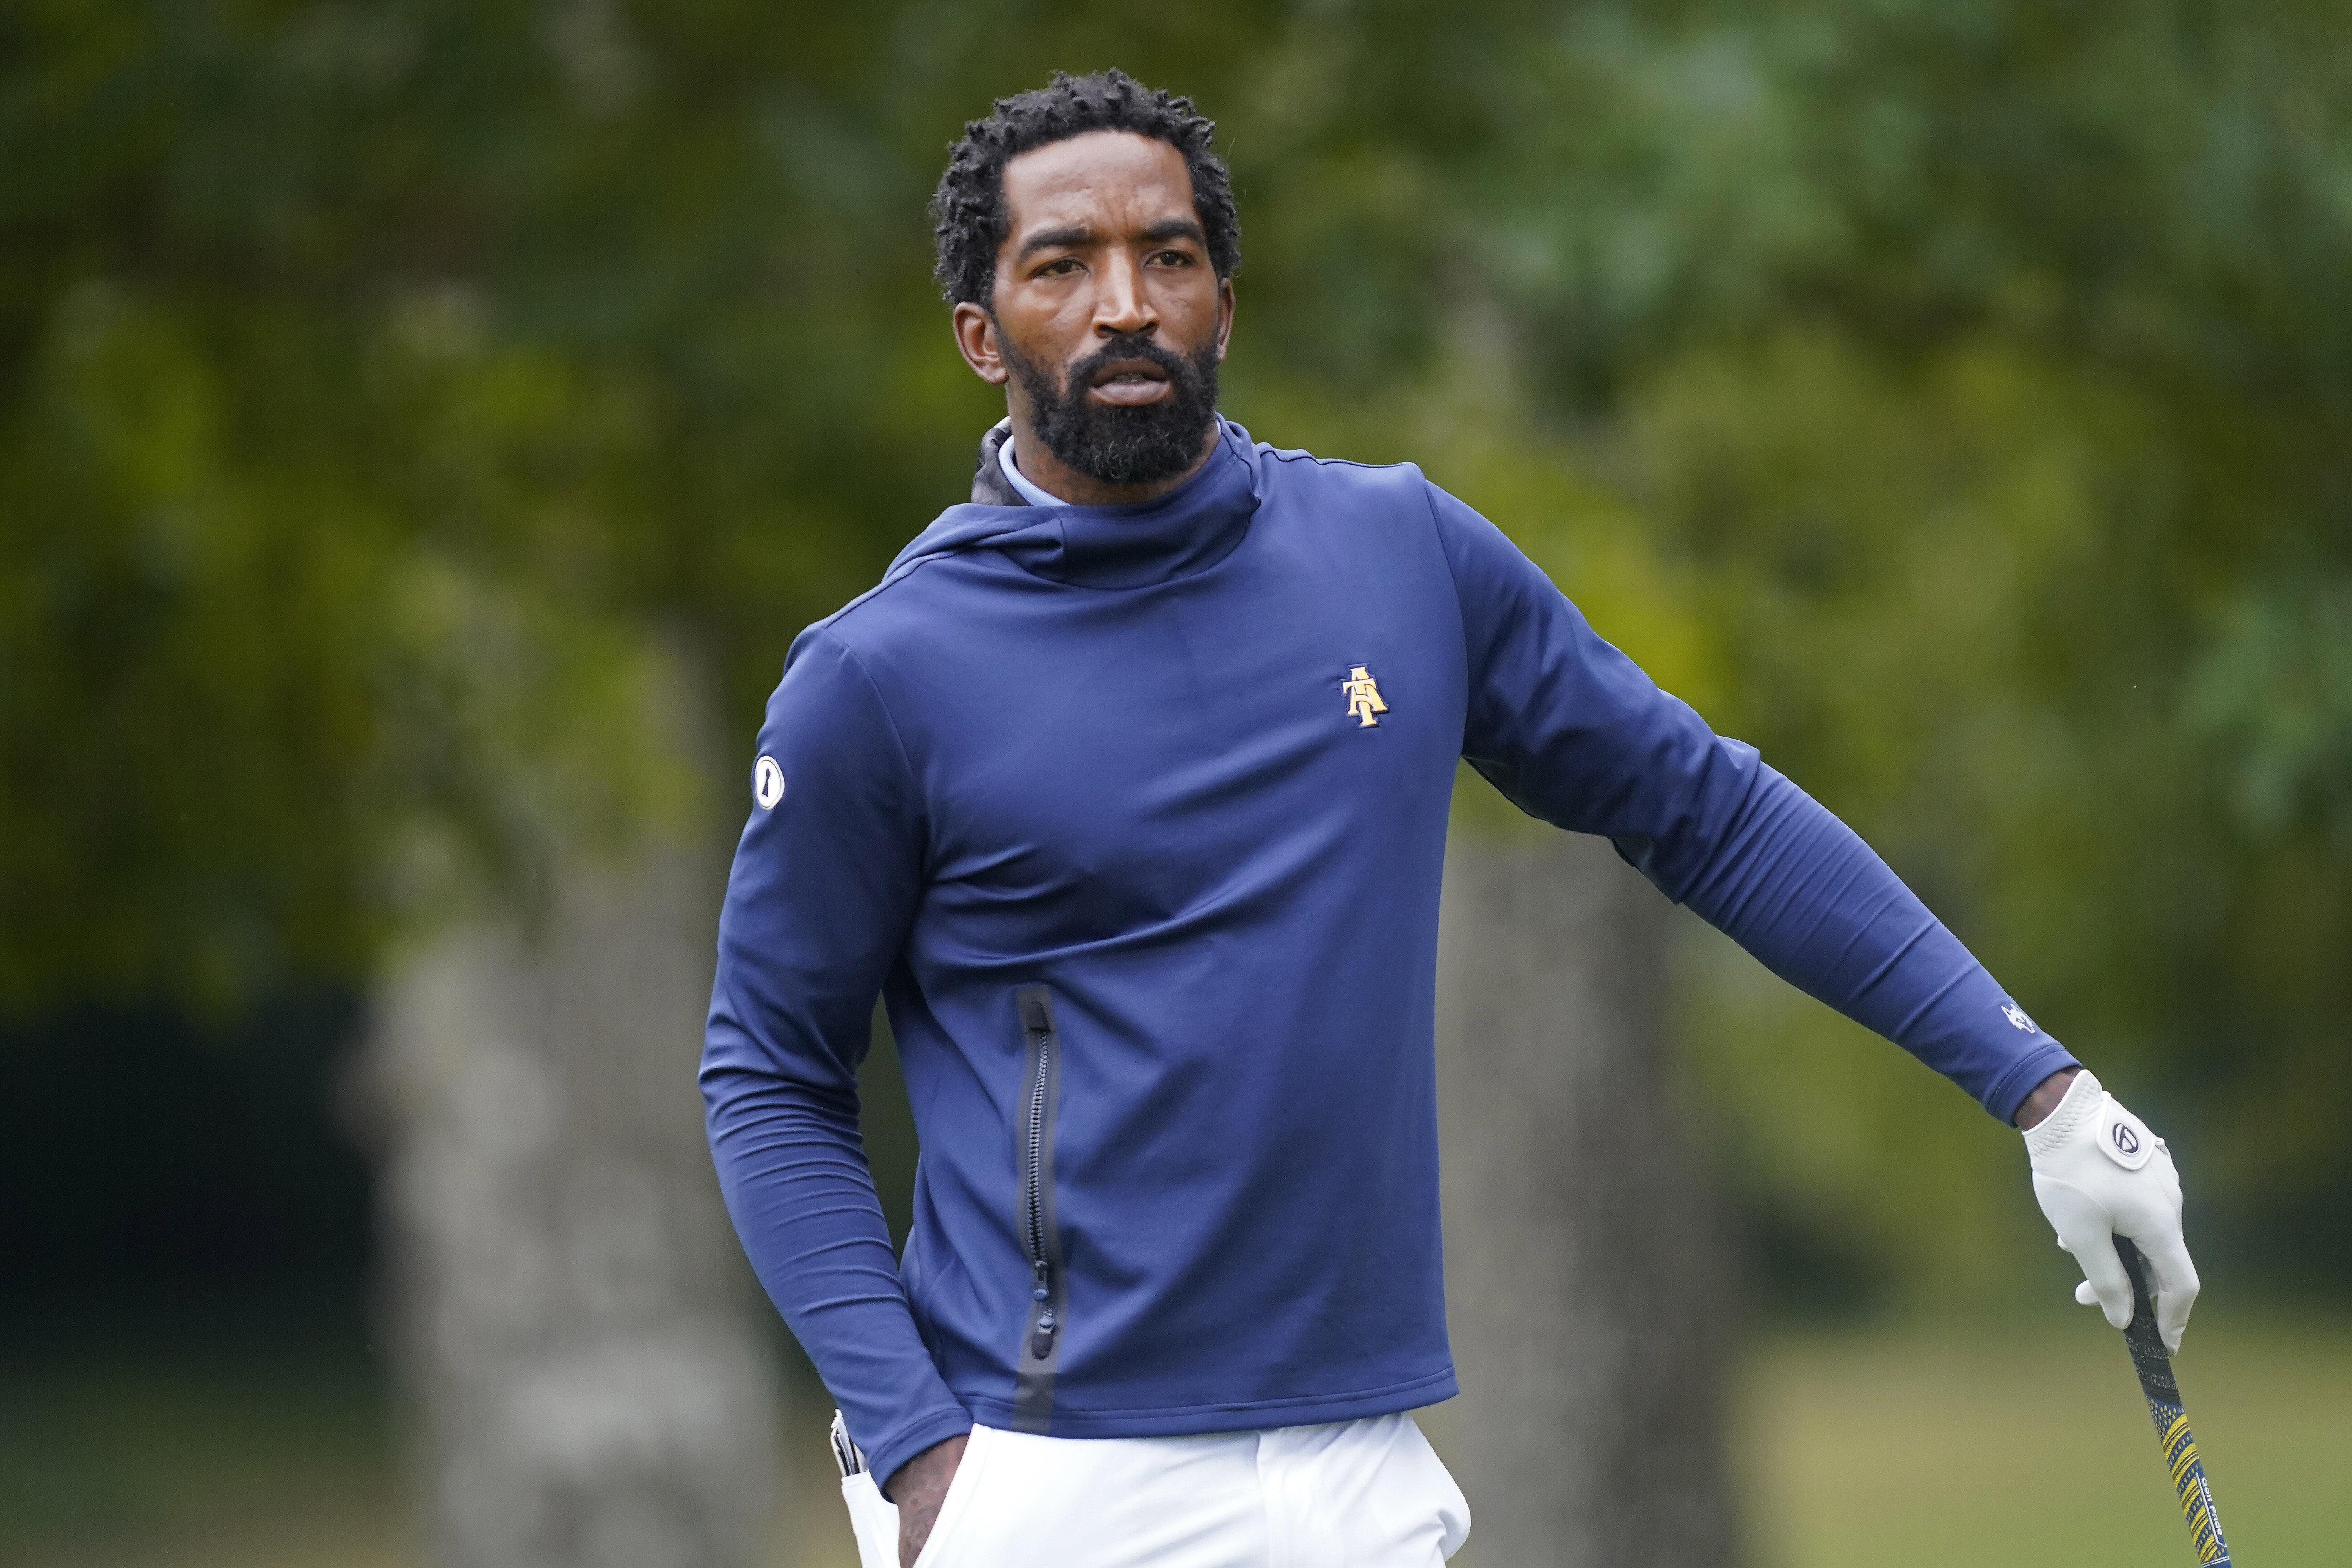 JR Smith cleared to play college golf for North Carolina A&T by NCAA